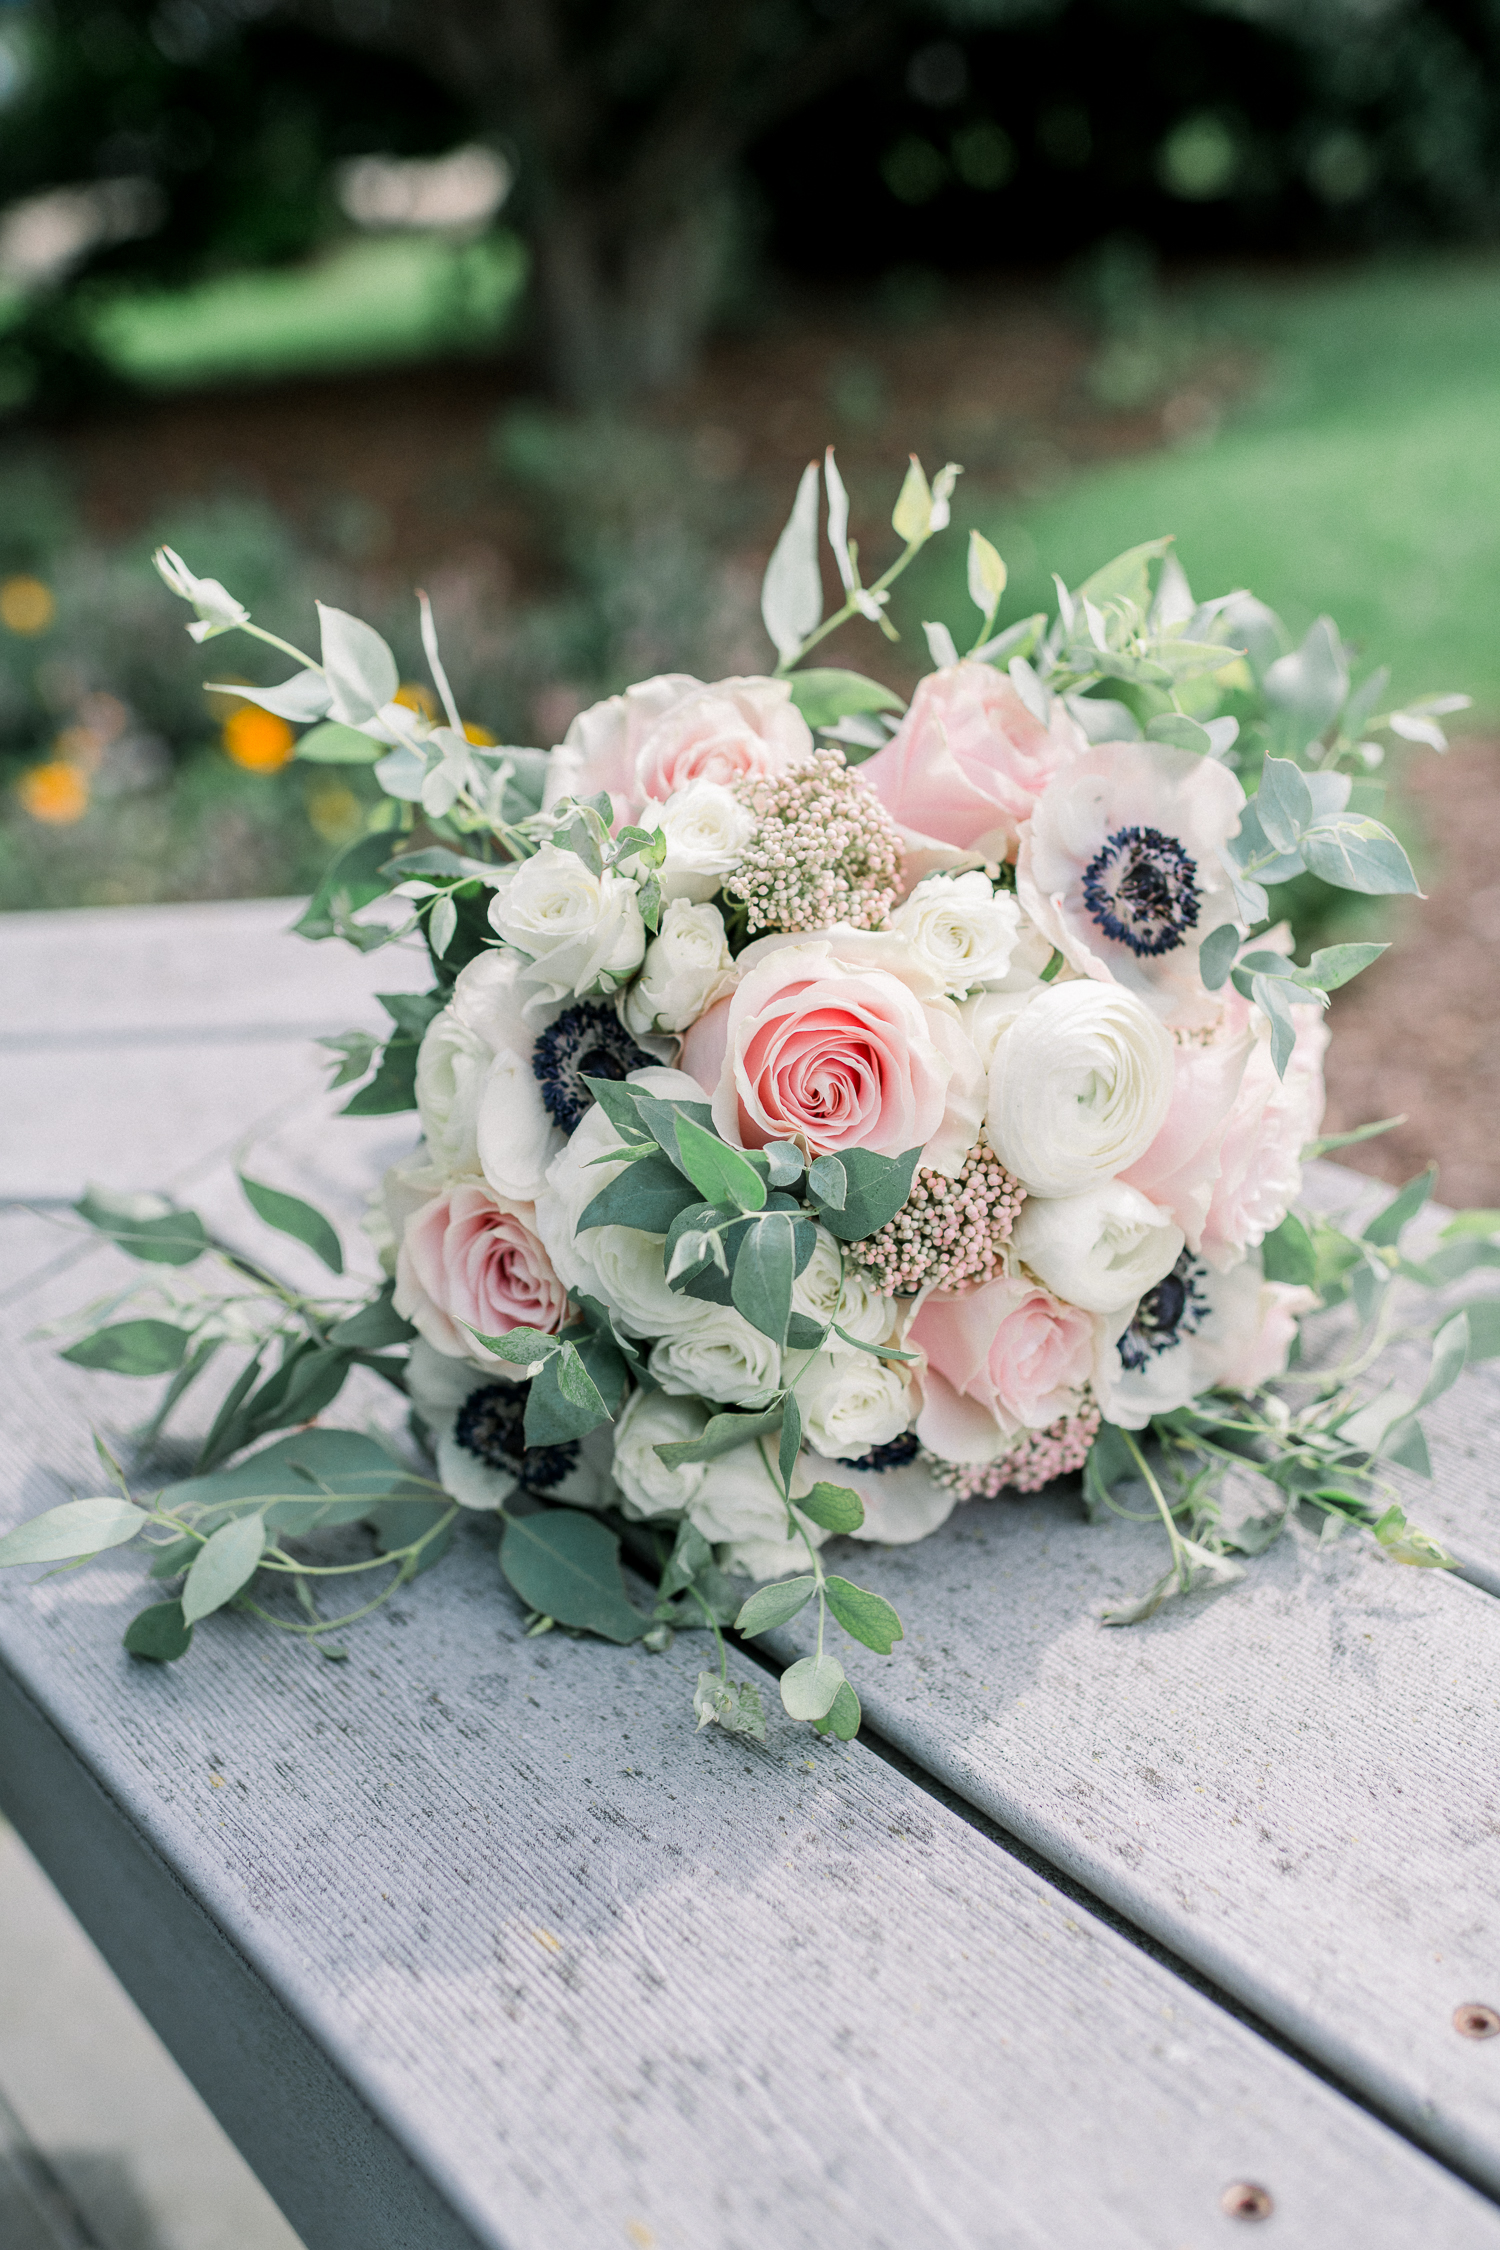 Bridal bouquet with blush pink and white roses and greenery